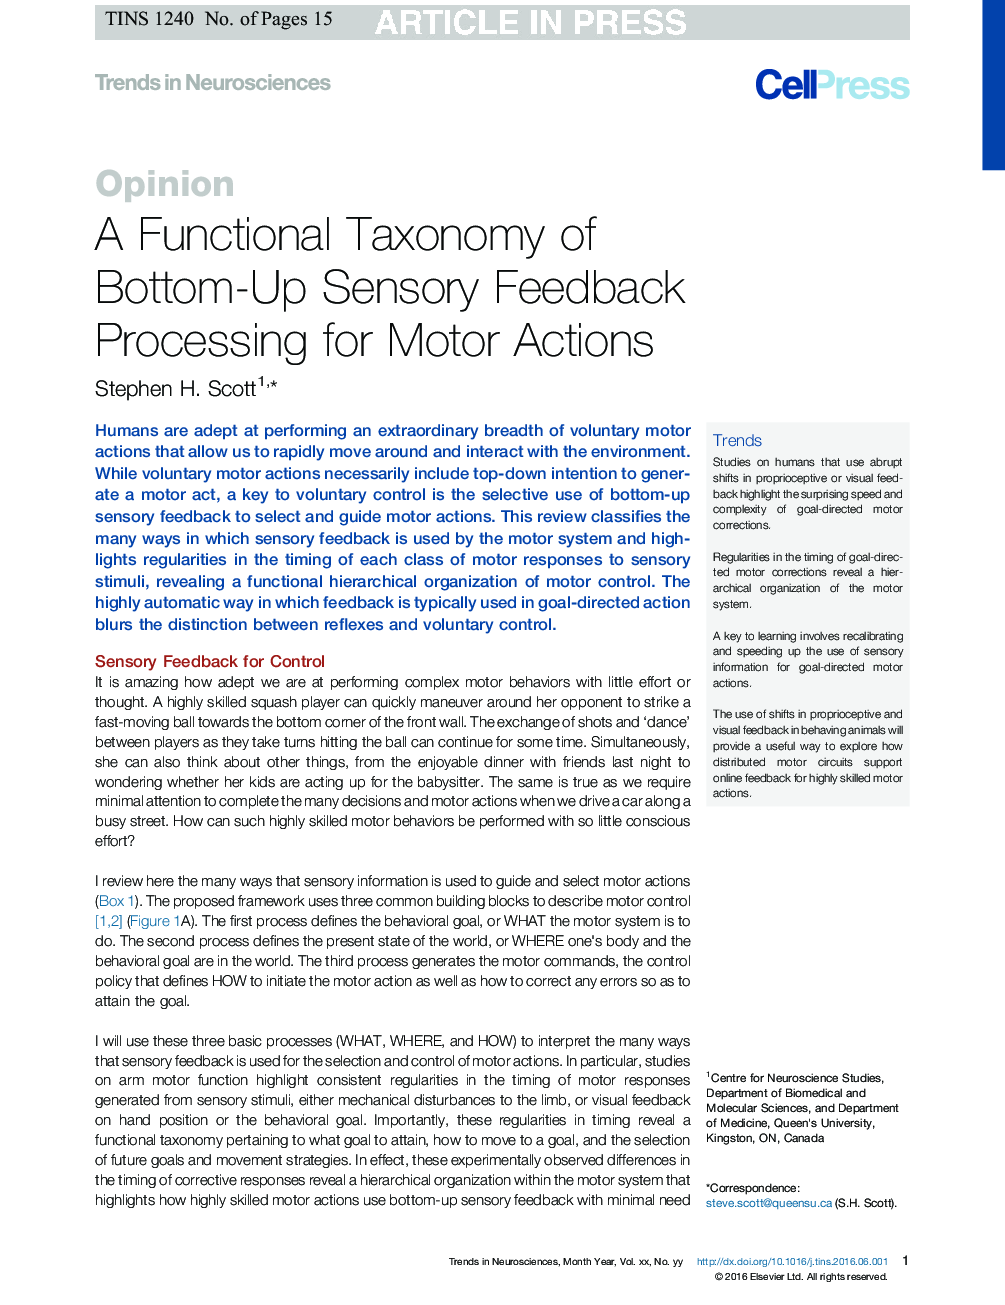 A Functional Taxonomy of Bottom-Up Sensory Feedback Processing for Motor Actions